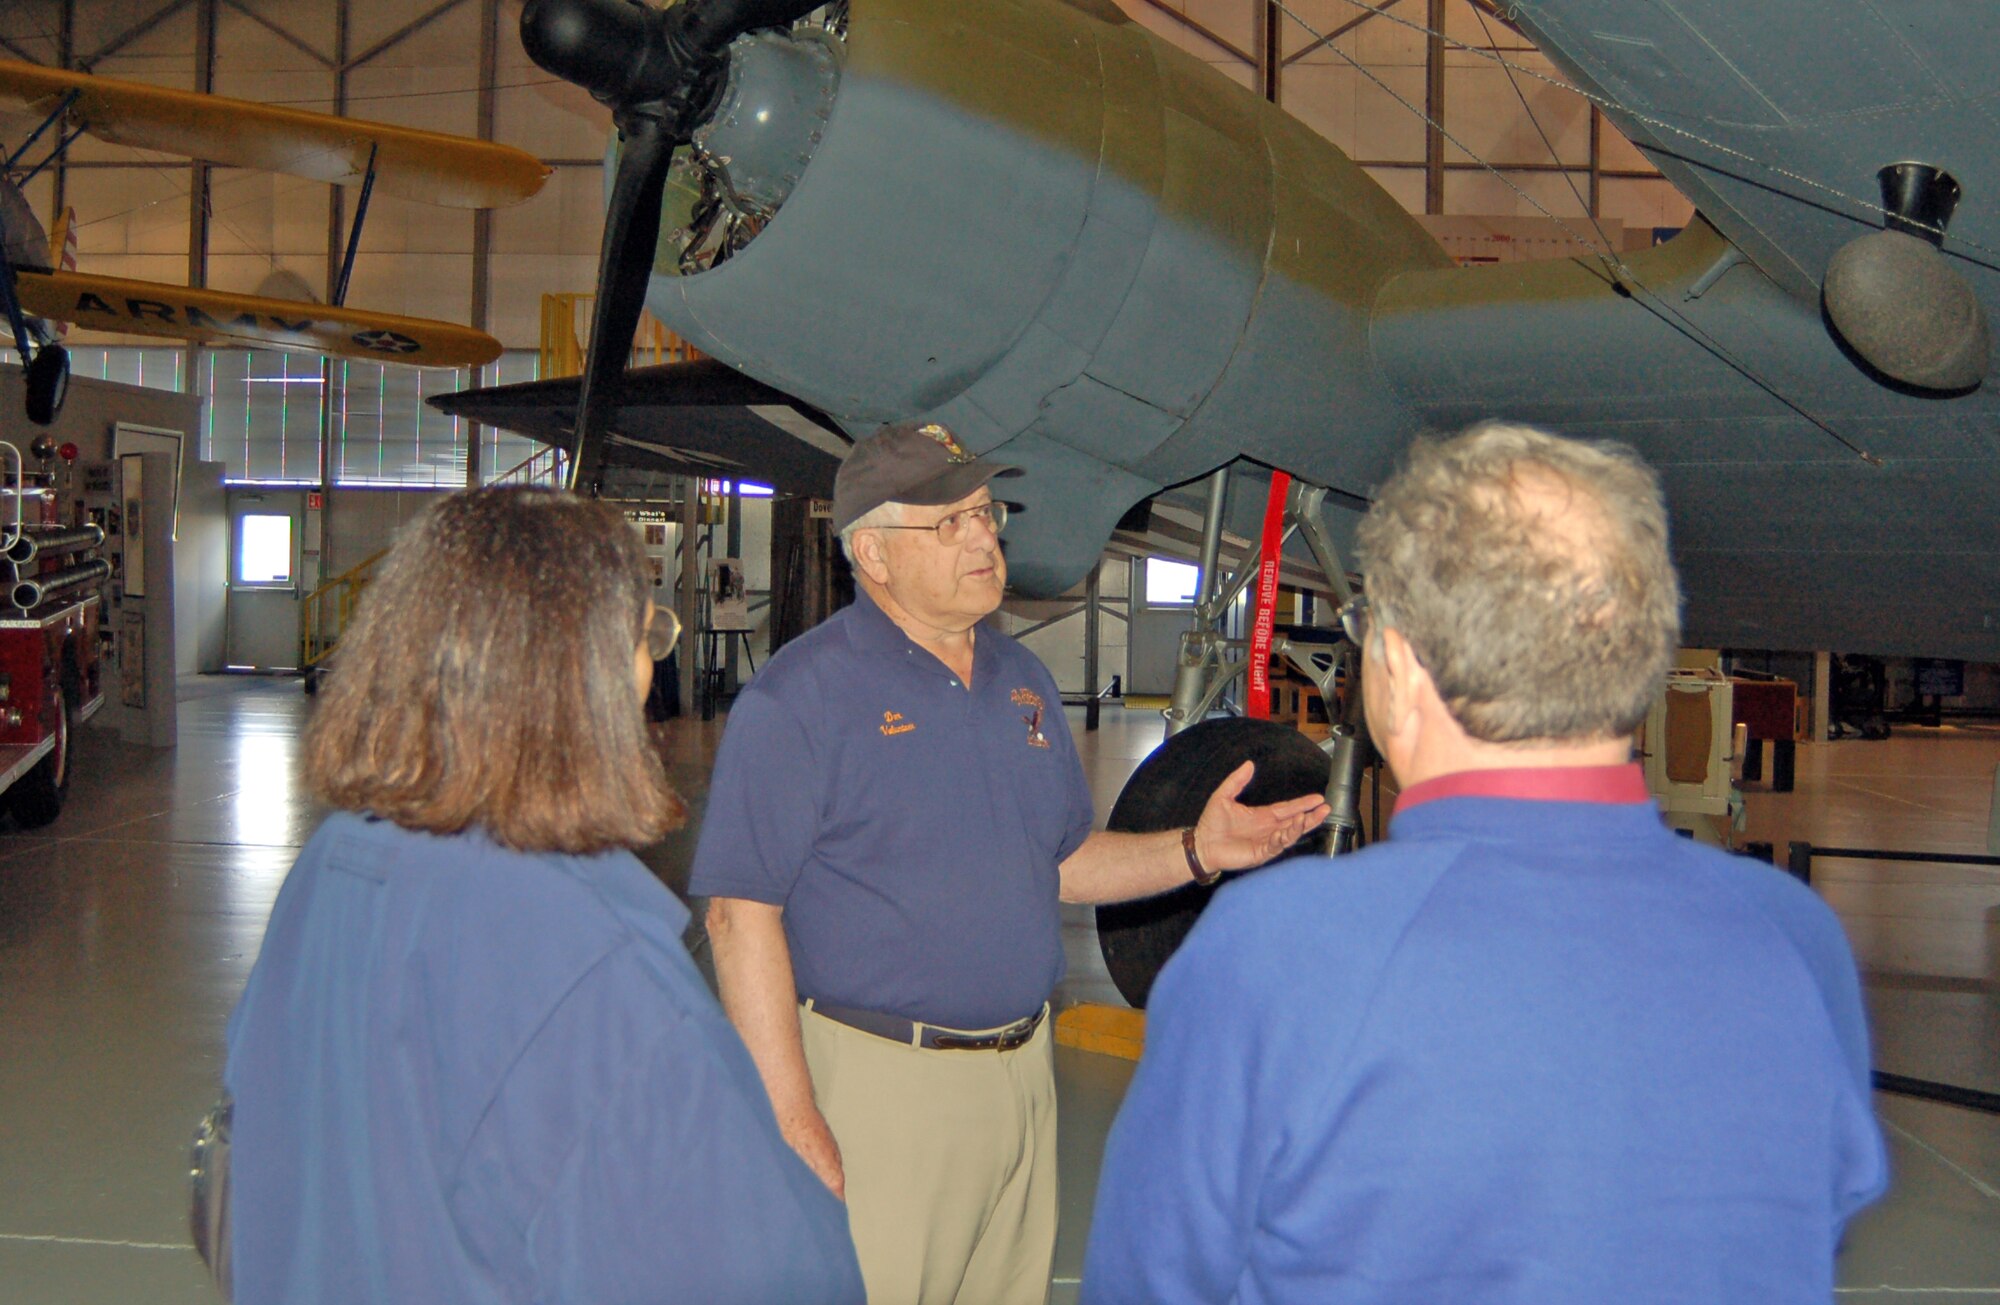 Don Clark (center), Air Mobility Command Museum volunteer and retired World War II C-47A pilot, tells Ellen Tress and Sid Edelman, visitors of the museum from Rockland County, N.Y., about the C-17A aircraft in the museum’s main exhibit Wednesday. Mr. Clark has given tours to museumgoers and history buffs at the museum for more than a year. (U.S. Air Force photo/Staff Sgt. James Wilkinson)